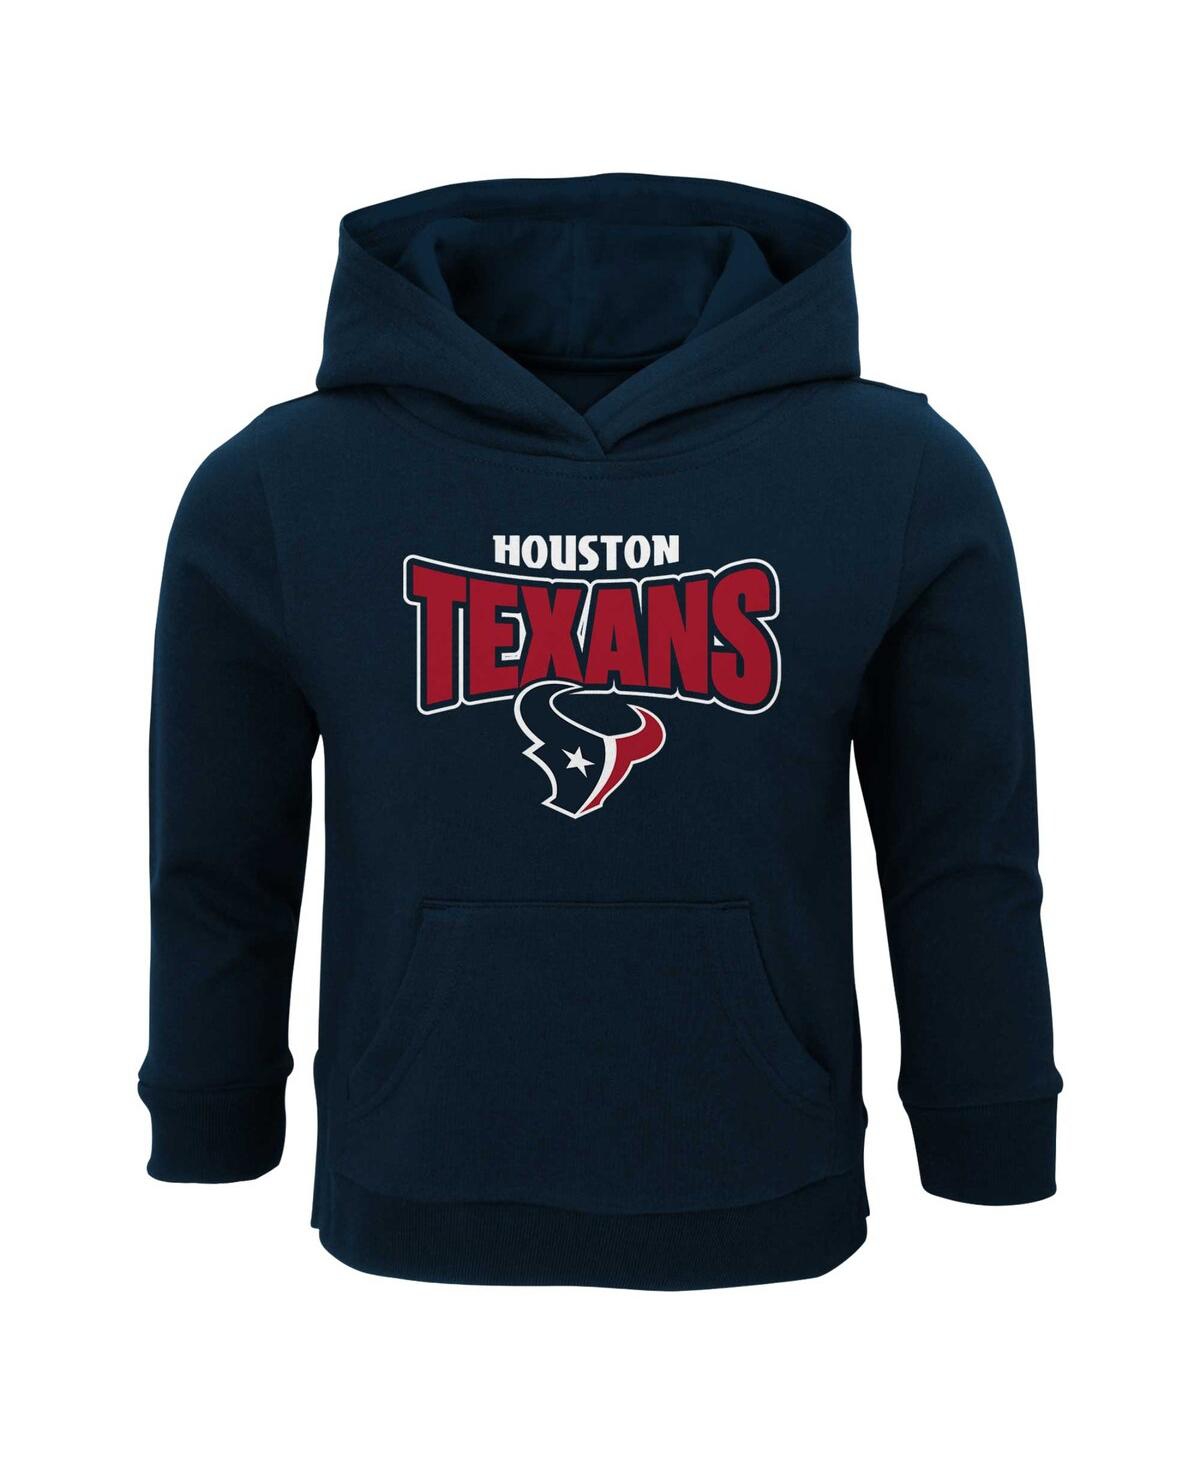 Outerstuff Babies' Toddler Boys And Girls Navy Houston Texans Draft Pick Pullover Hoodie